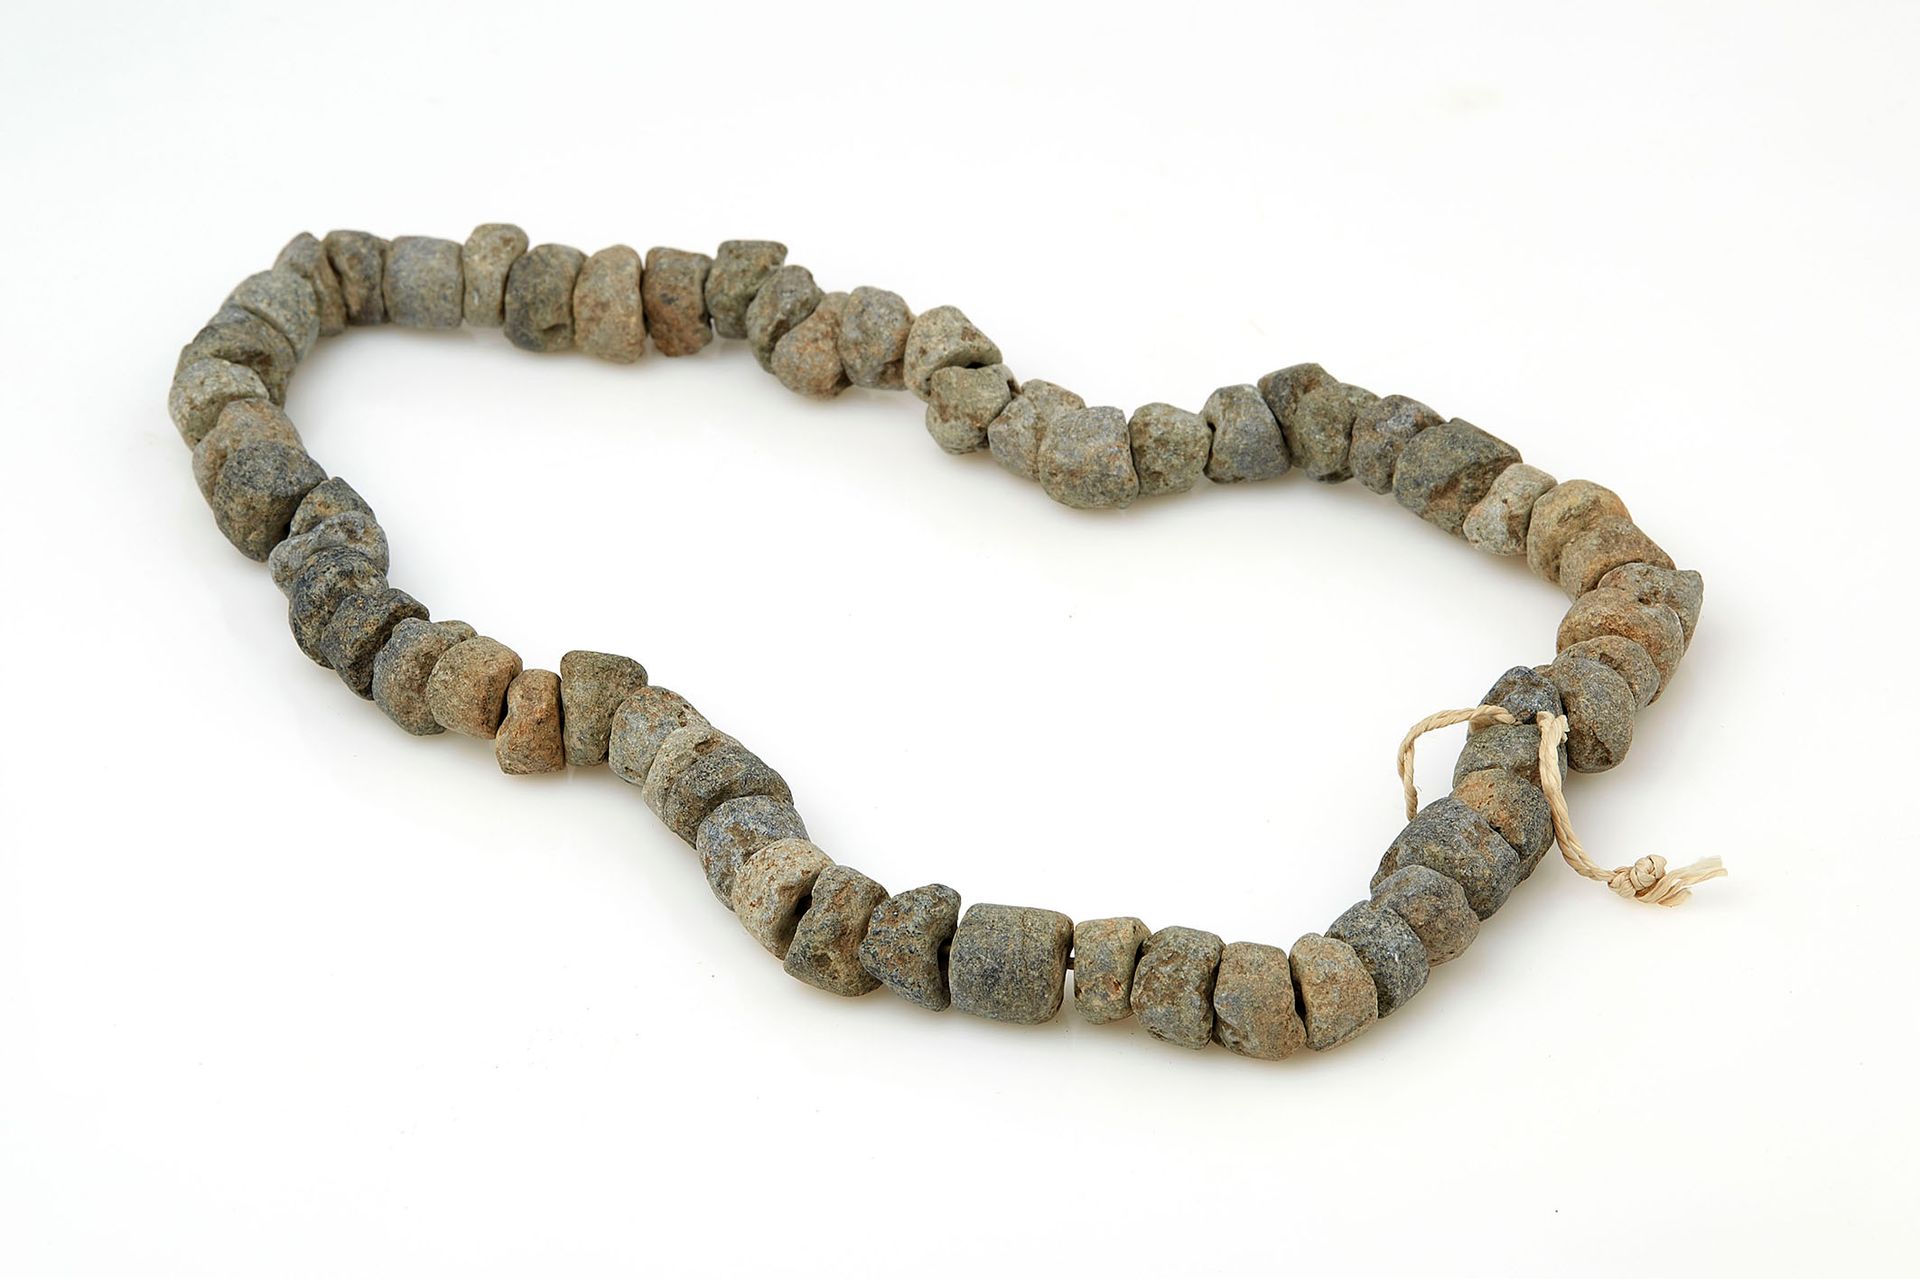 Null Necklace made of antique stone beads. Antique period. Length : 47 cm.